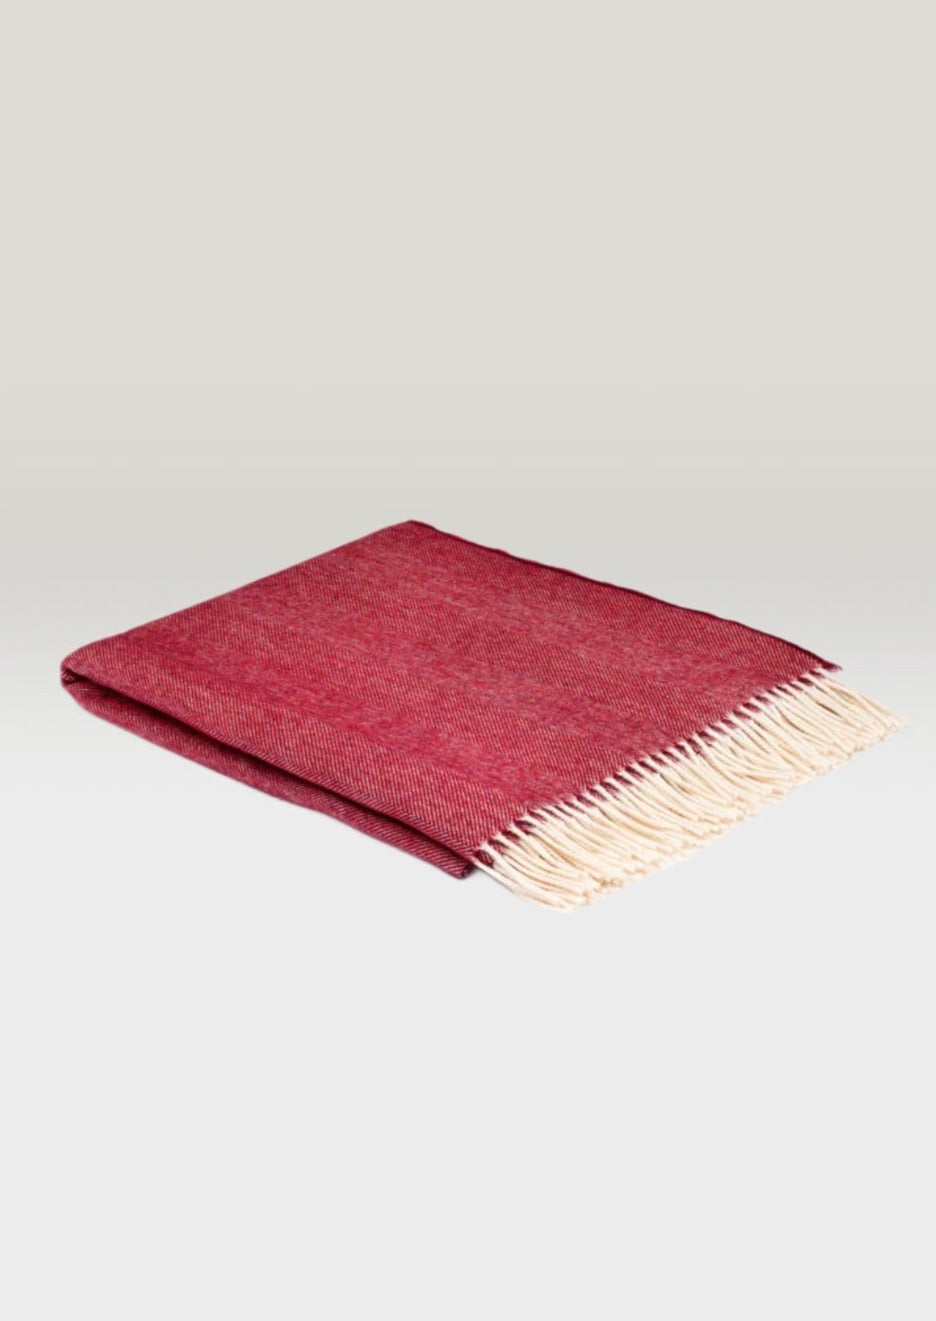 McNutt Spotted Cranberry Supersoft Blanket